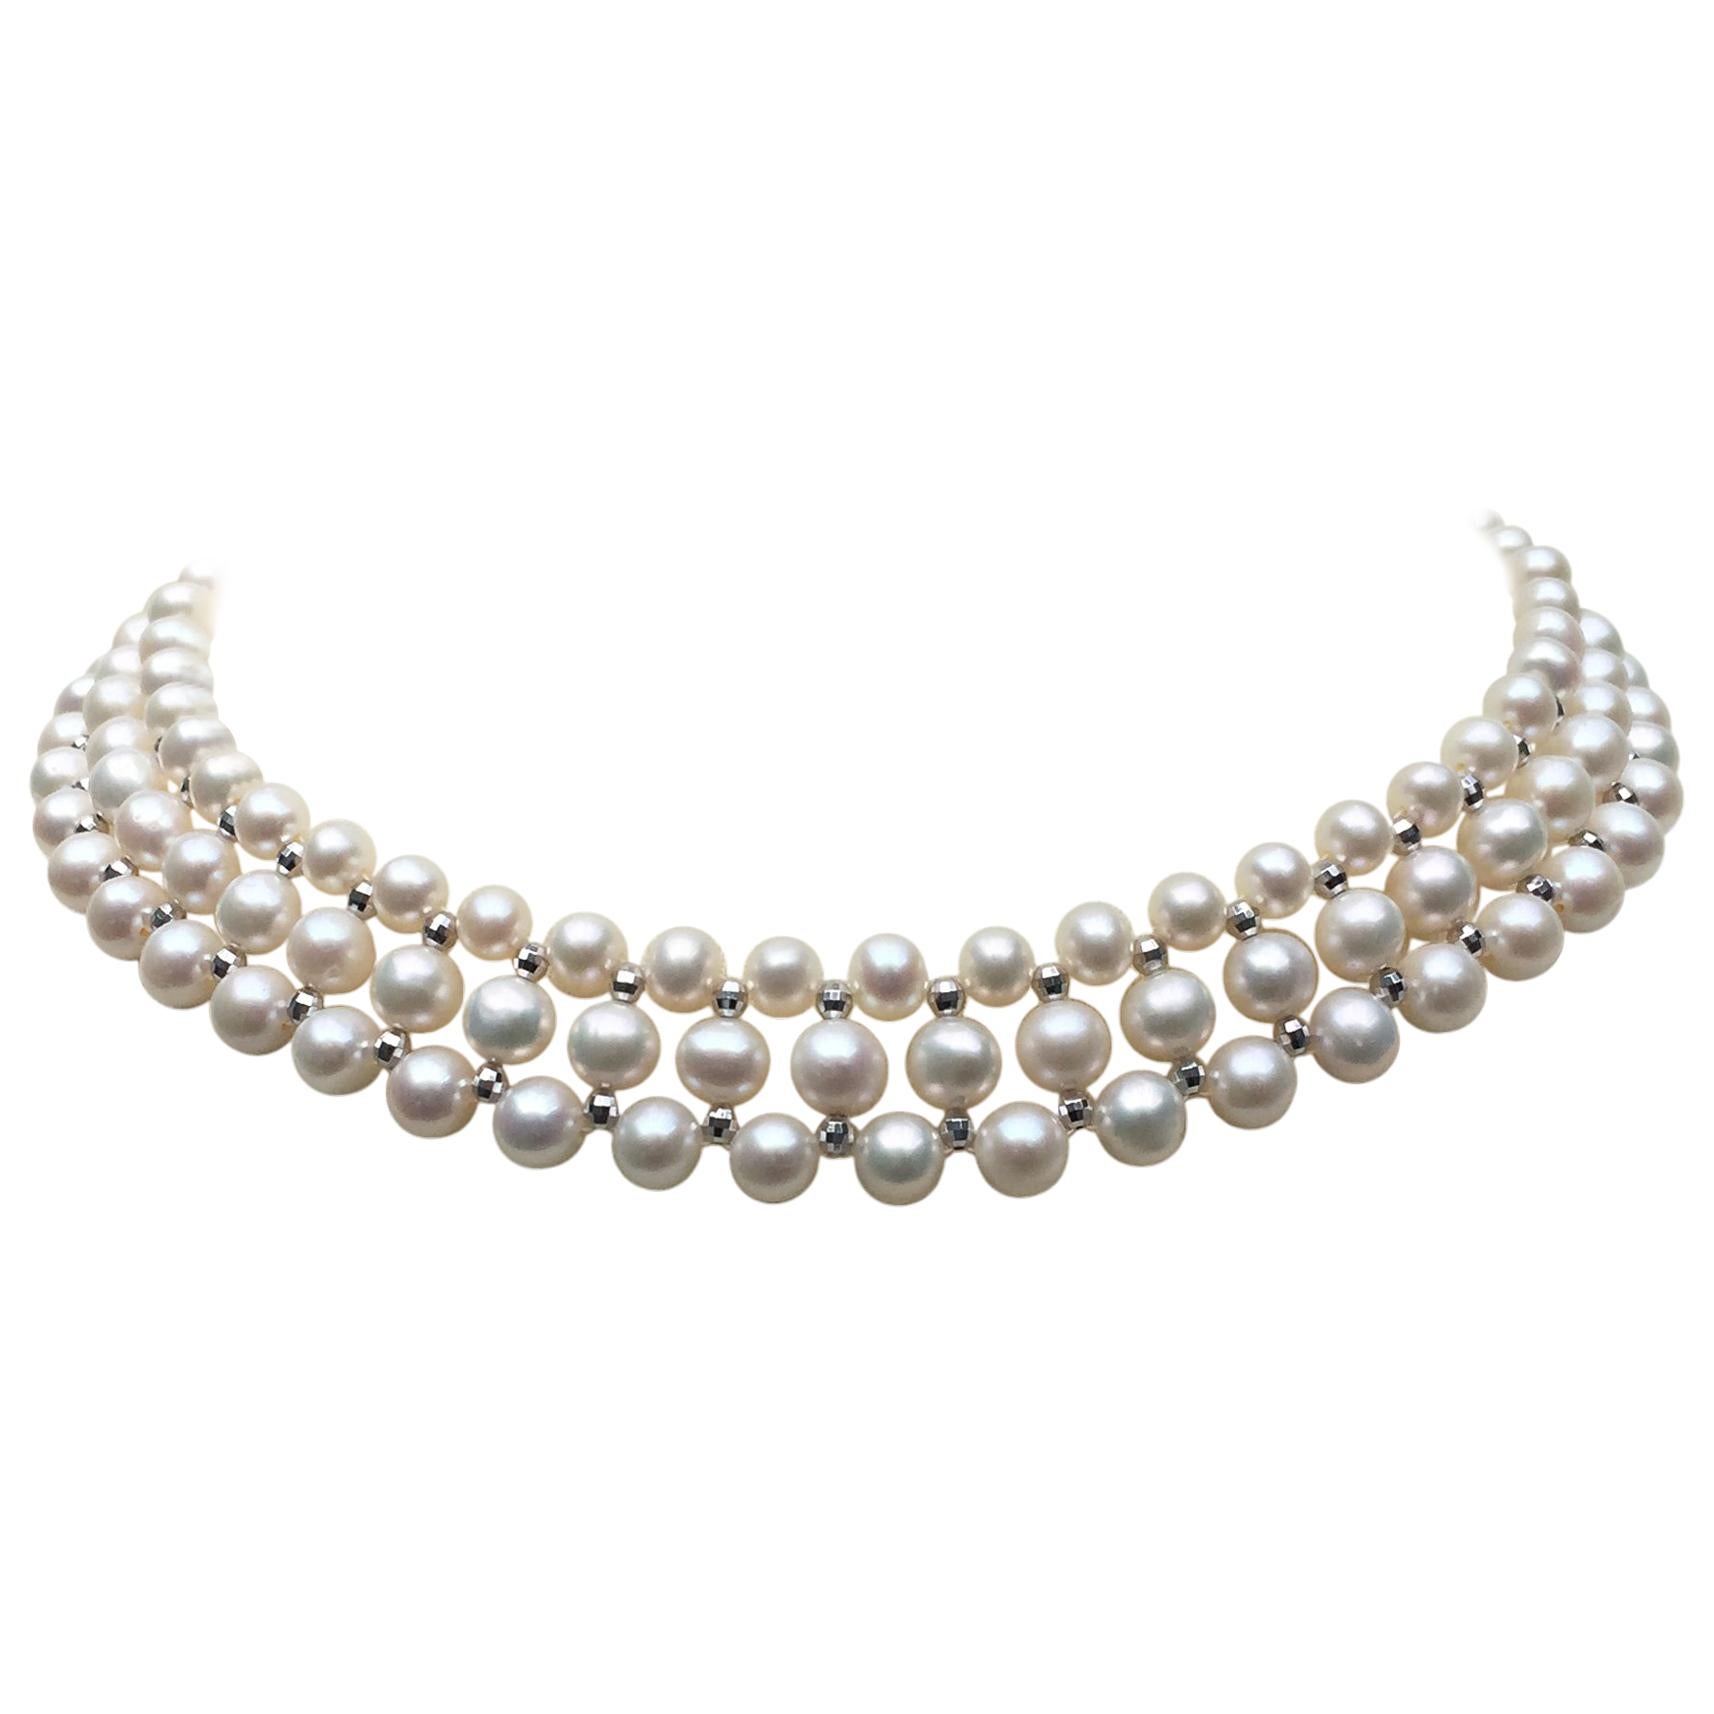 Woven White Pearl Necklace with 14 Karat Gold Faceted Beads and Sliding Clasp